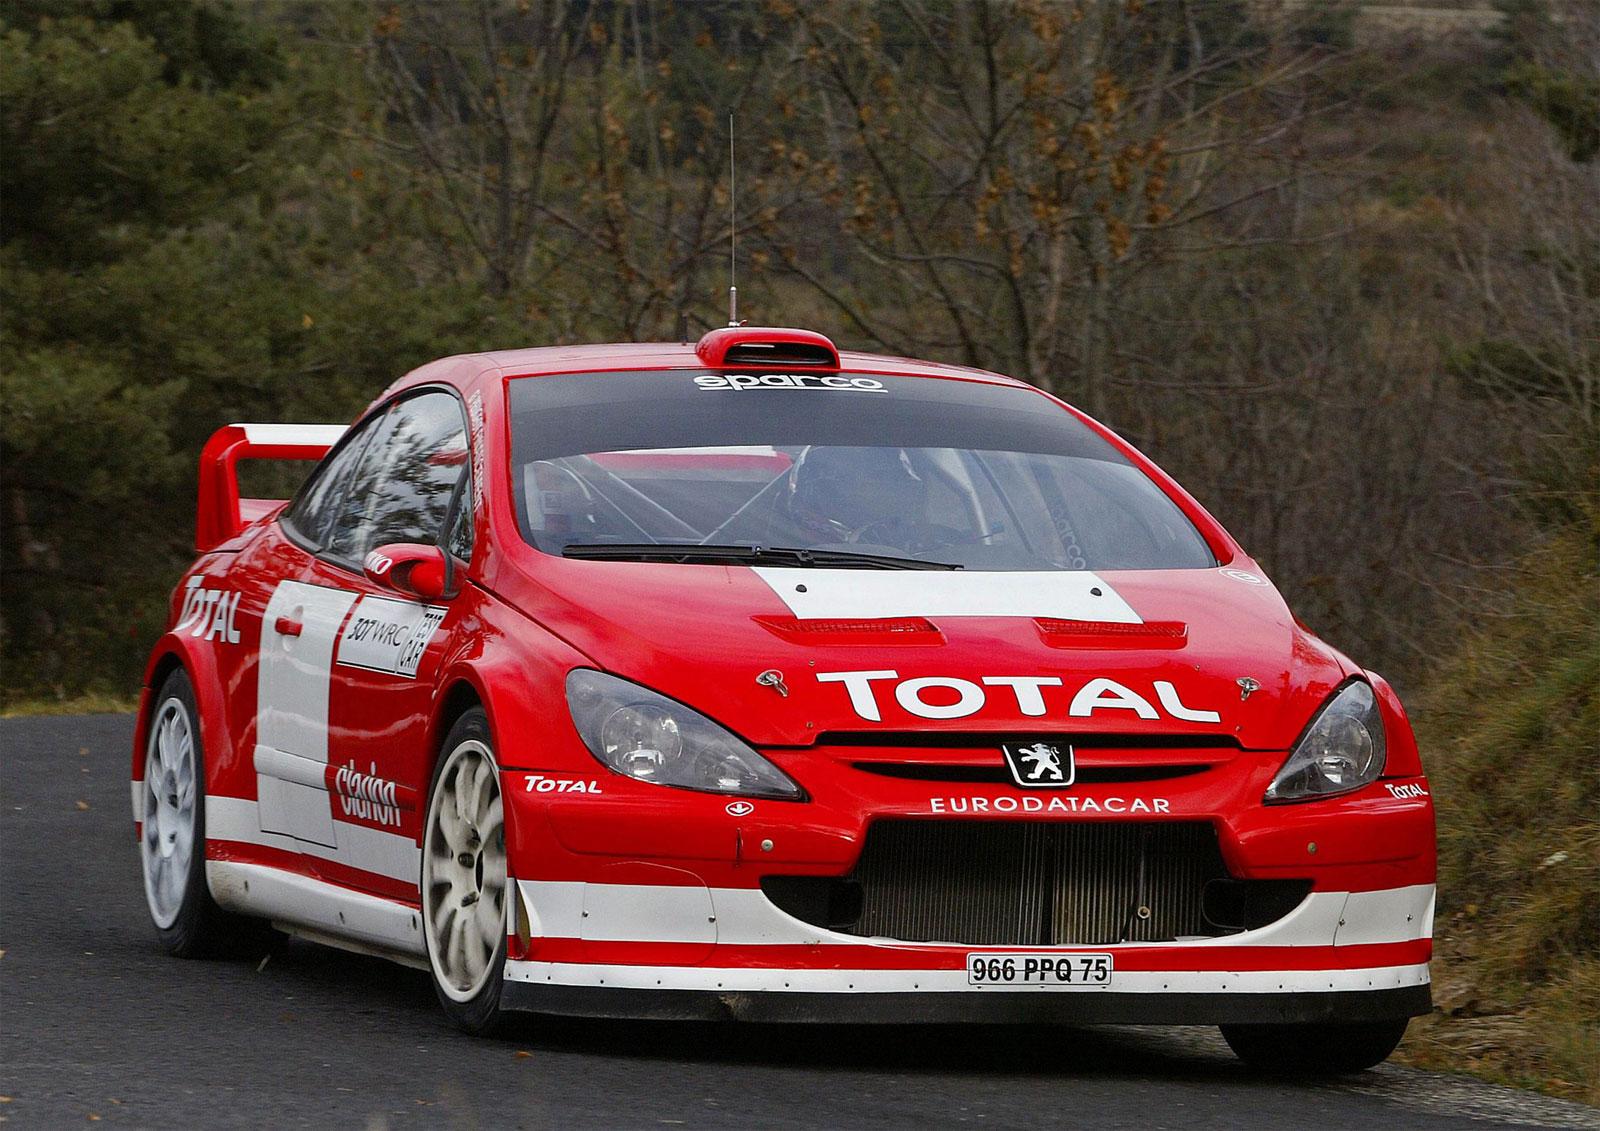 Peugeot 307 WRC Wallpaper and Image Gallery